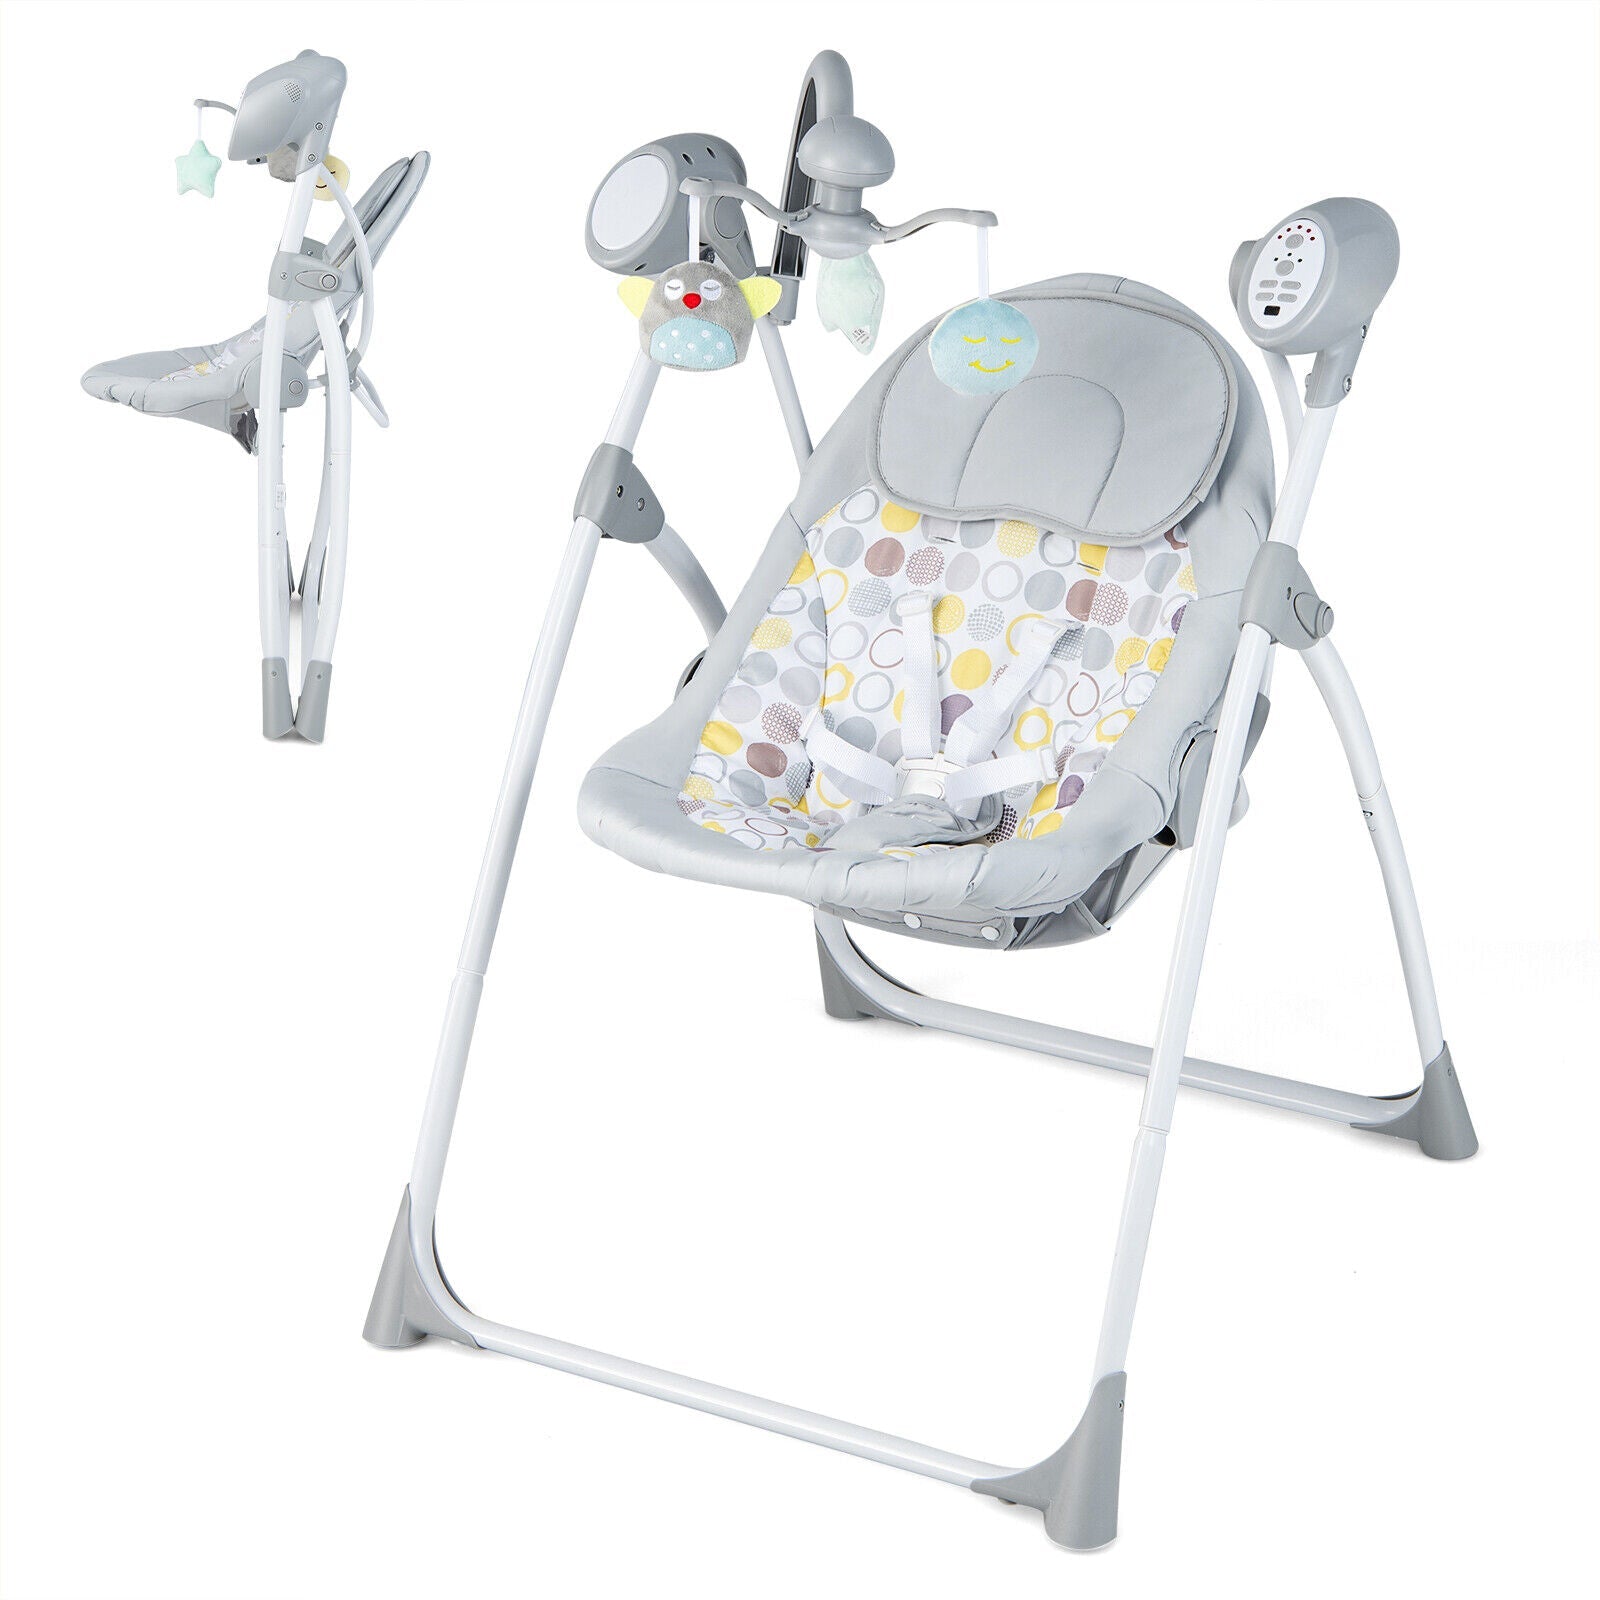 Foldable & Portable Electric Baby Rocking Chair with Adjustable Backrest